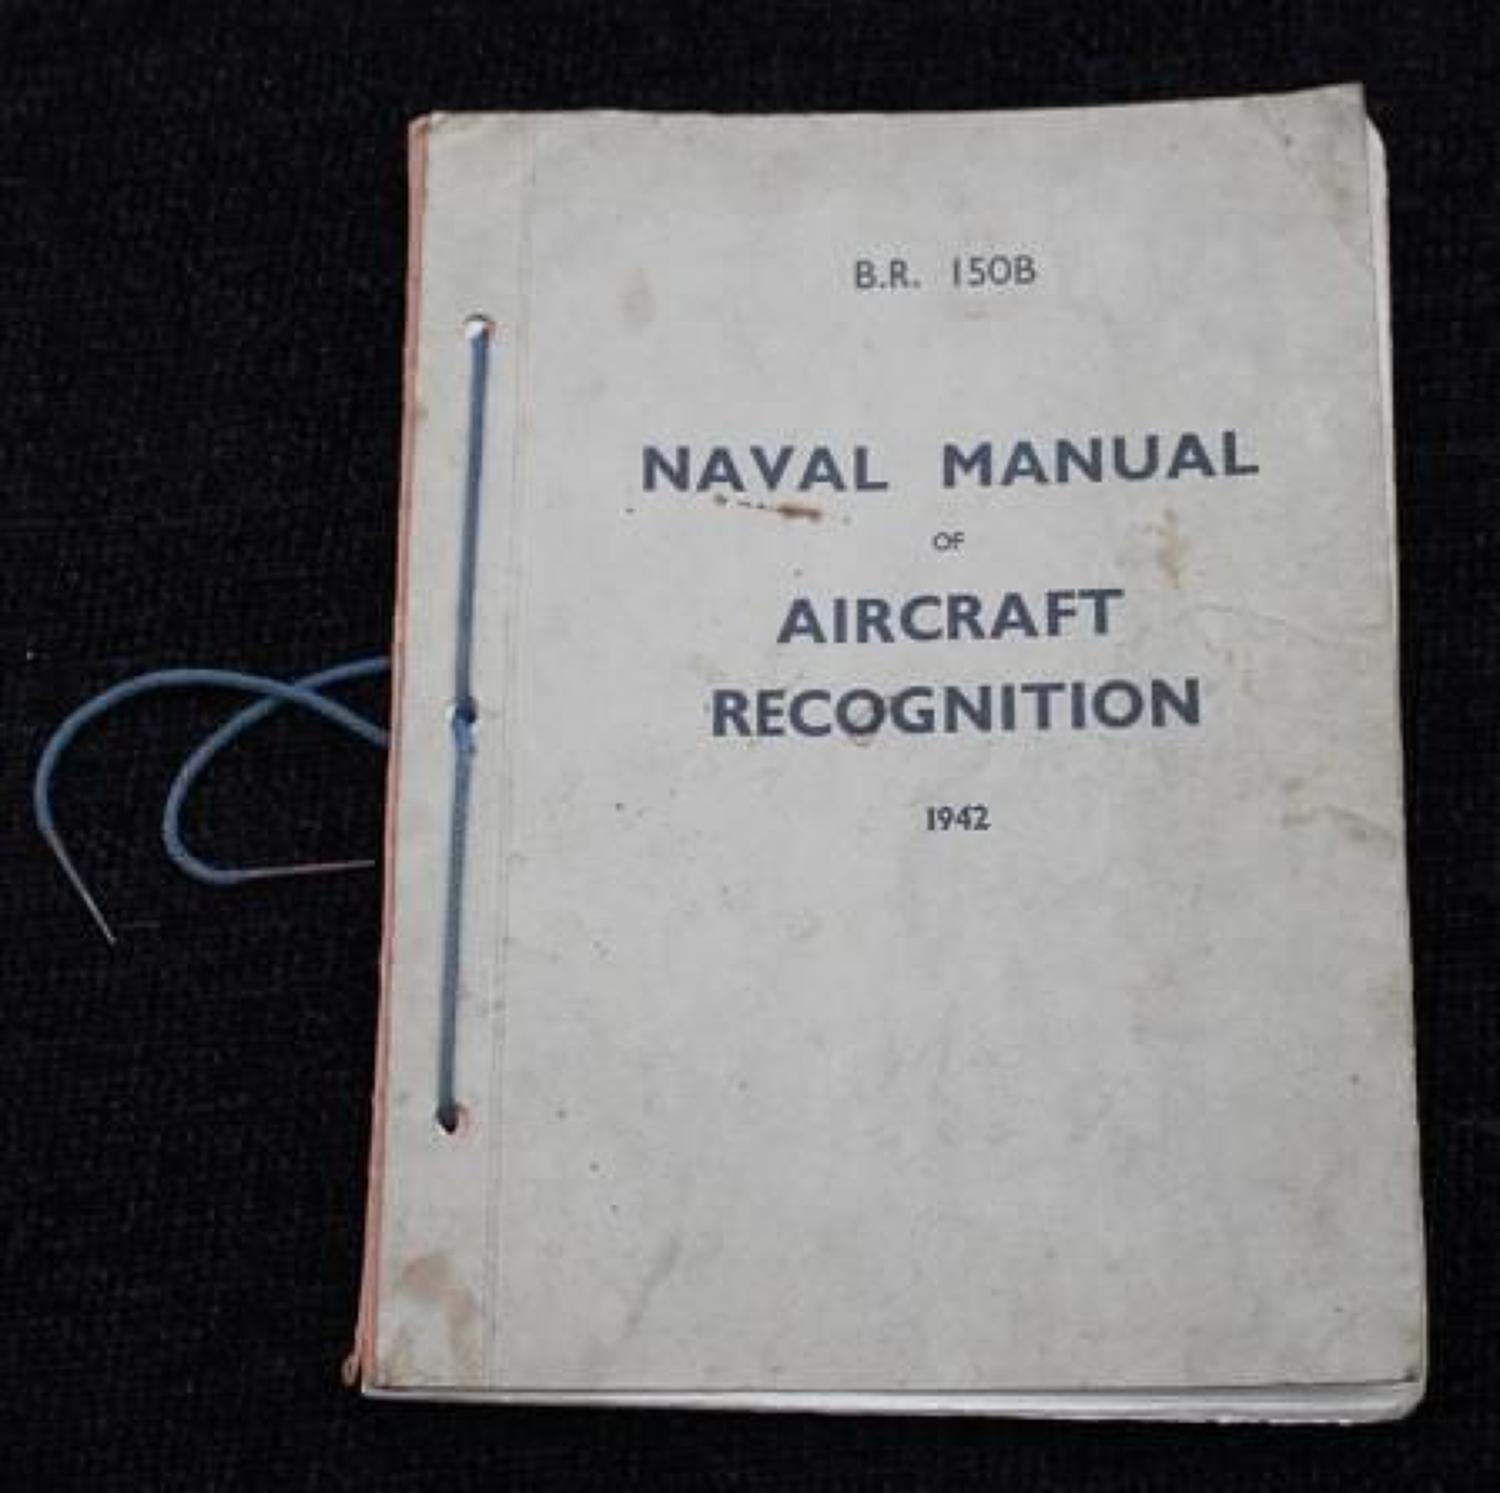 Naval Manuel Of Aircraft Recognition 1942 B.R.150B